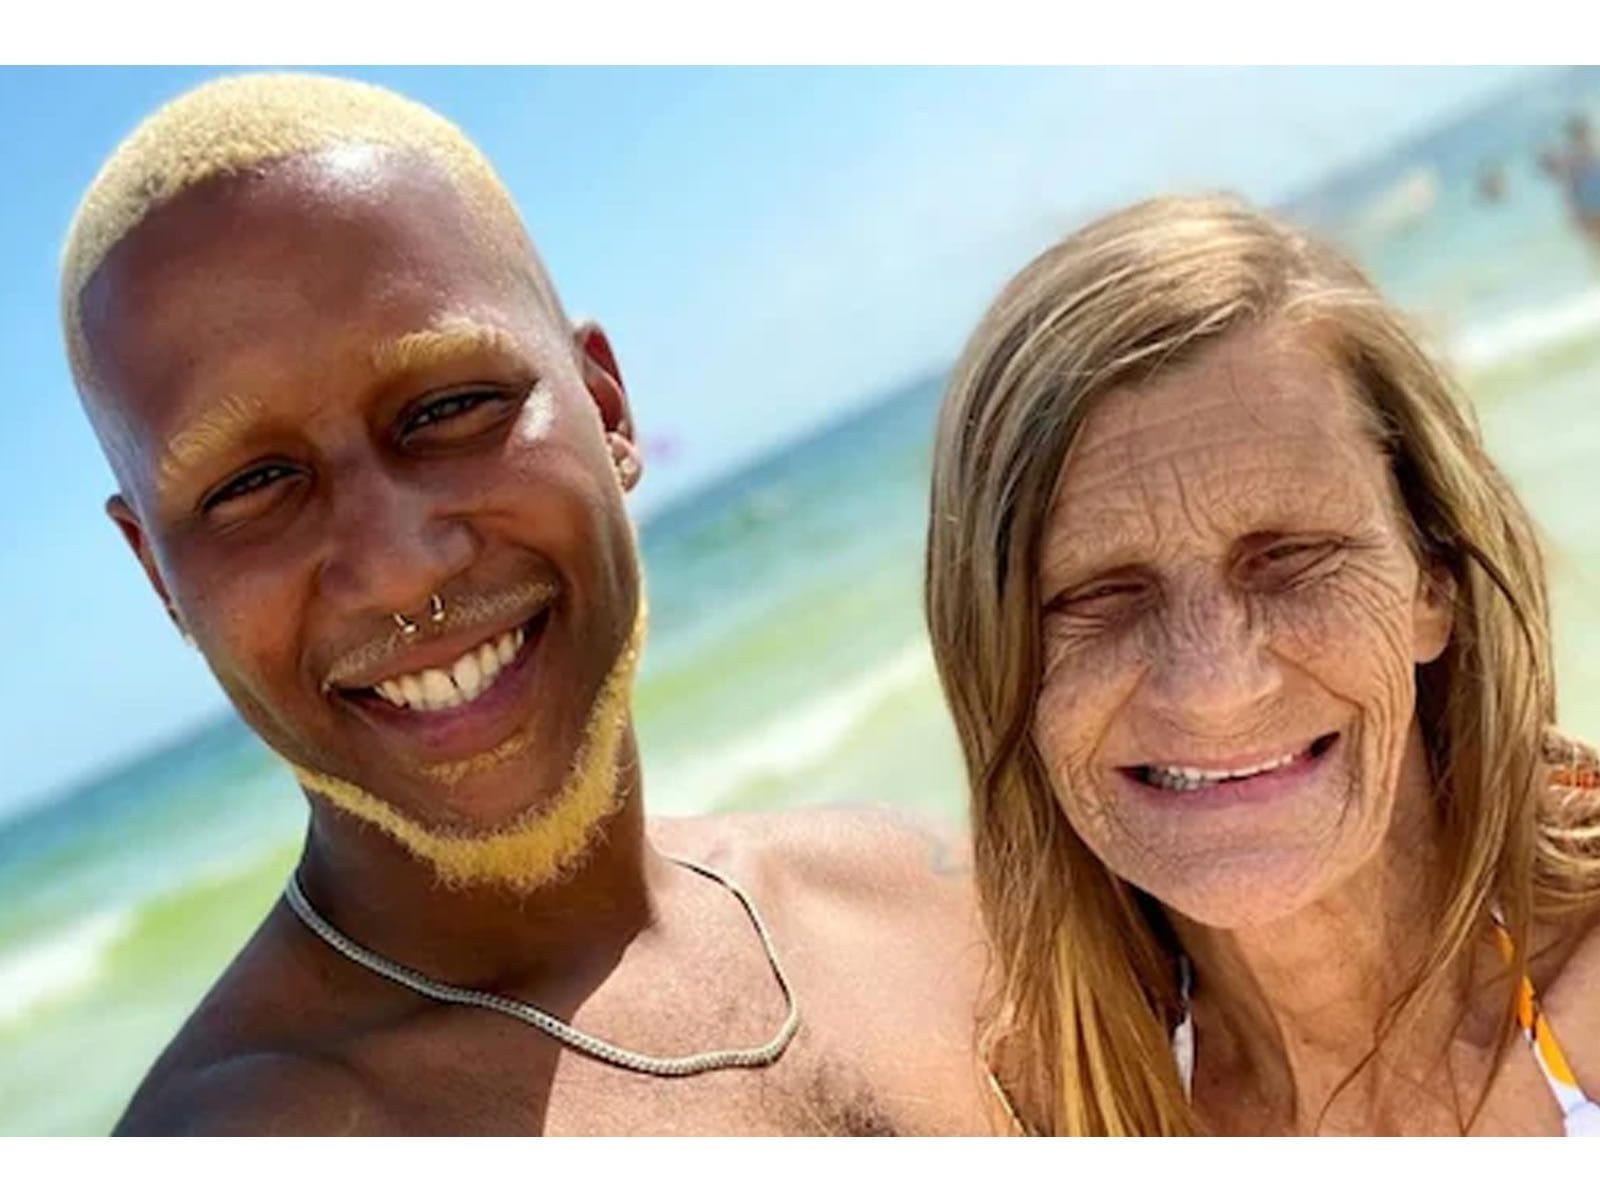 Ancient Granny Boy Sex - 61-Year-Old American Grandma of 17 Finds Love In 24-Year-Old Man